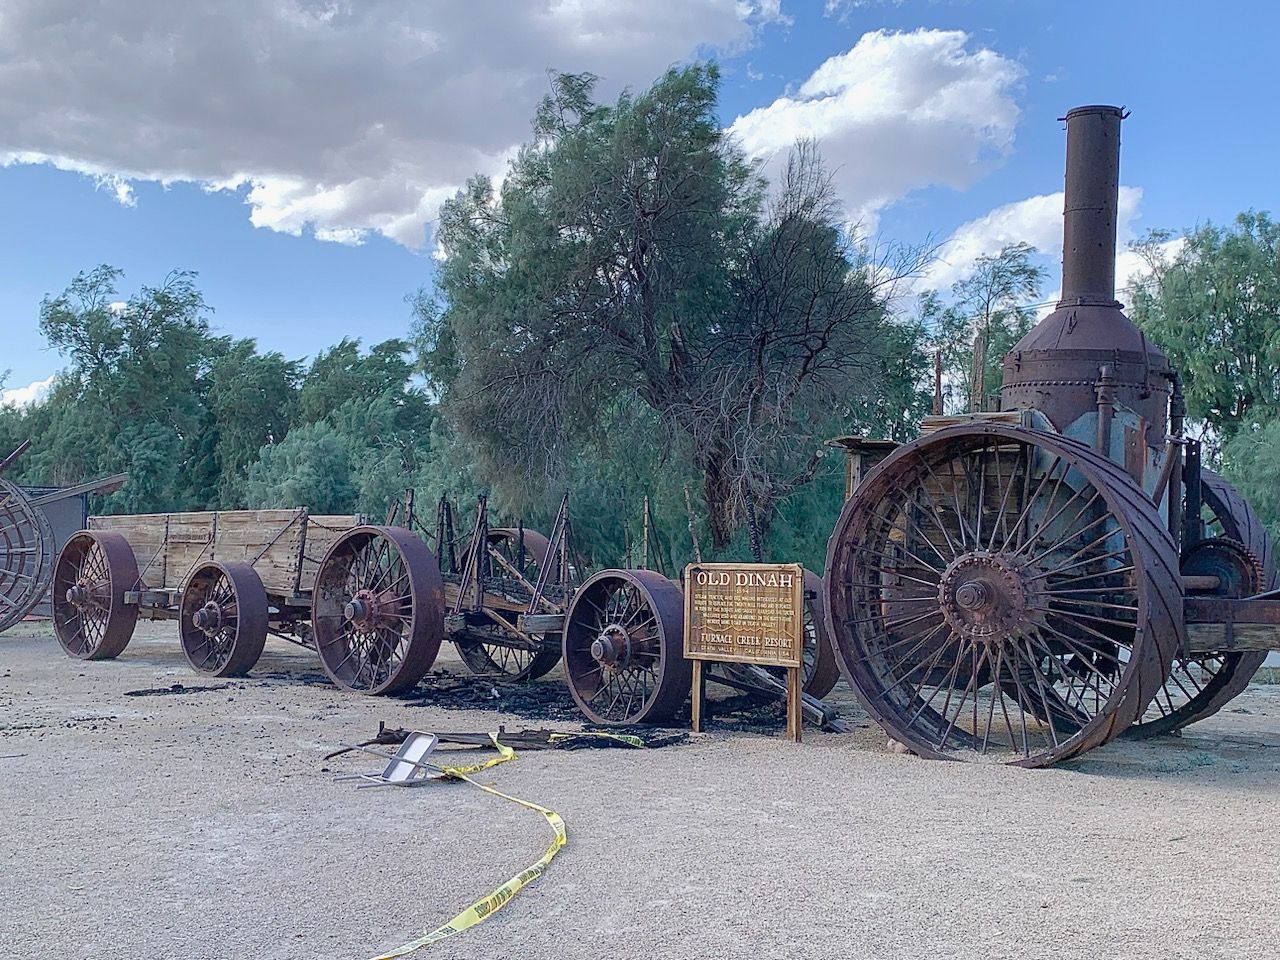 A historic borax wagon and "Old Dinah," a historic steam engine with a burned historic borax wagon in between them and green tamarisk trees in the background.